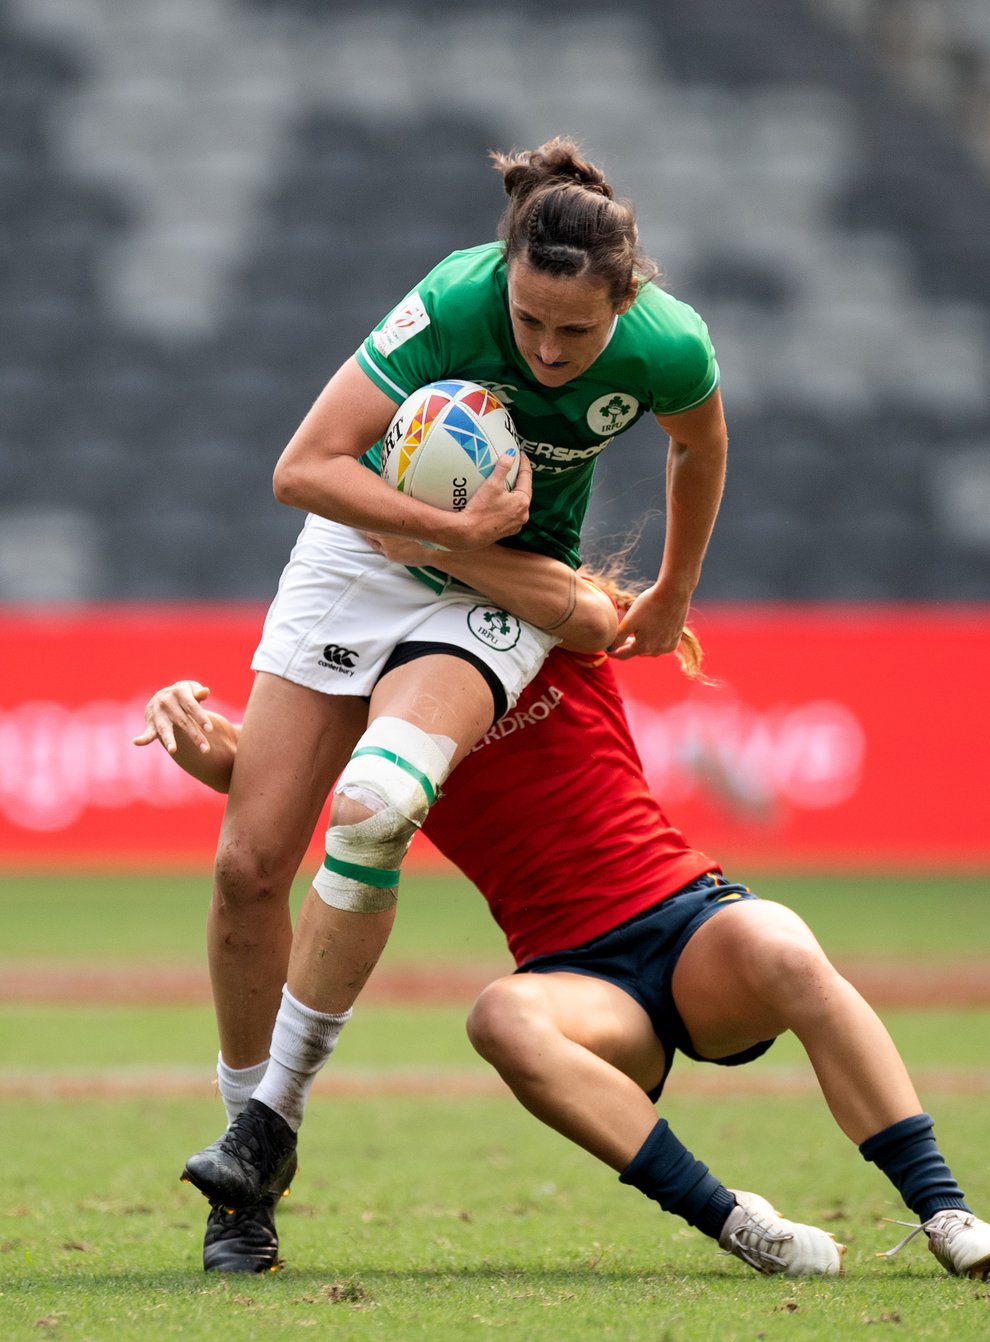 Tyrrell has announced her retirement from sevens rugby